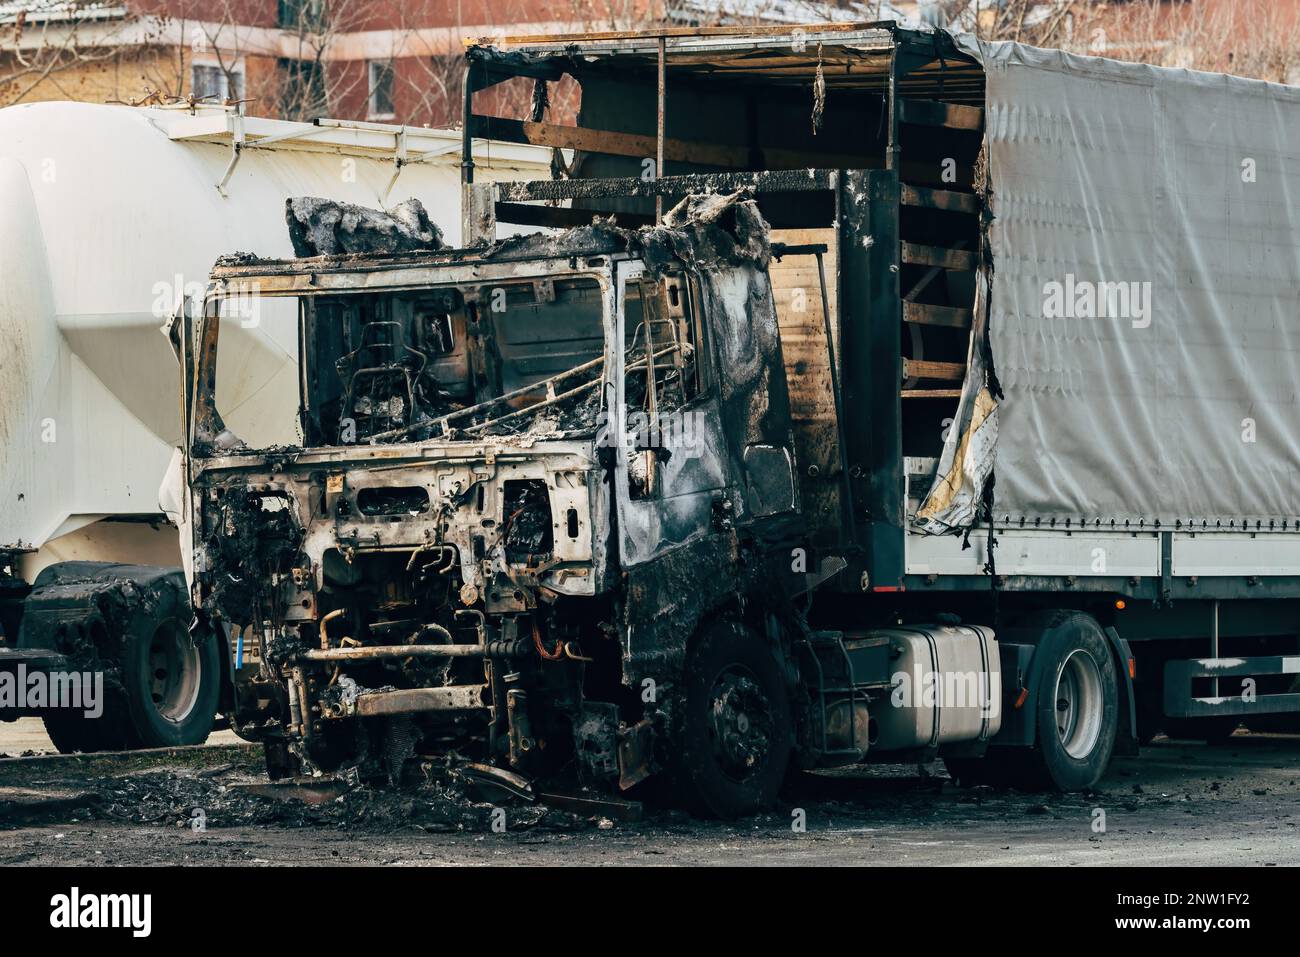 Semi truck engulfed by fire flames after traffic accident is burned and damaged, selective focus Stock Photo